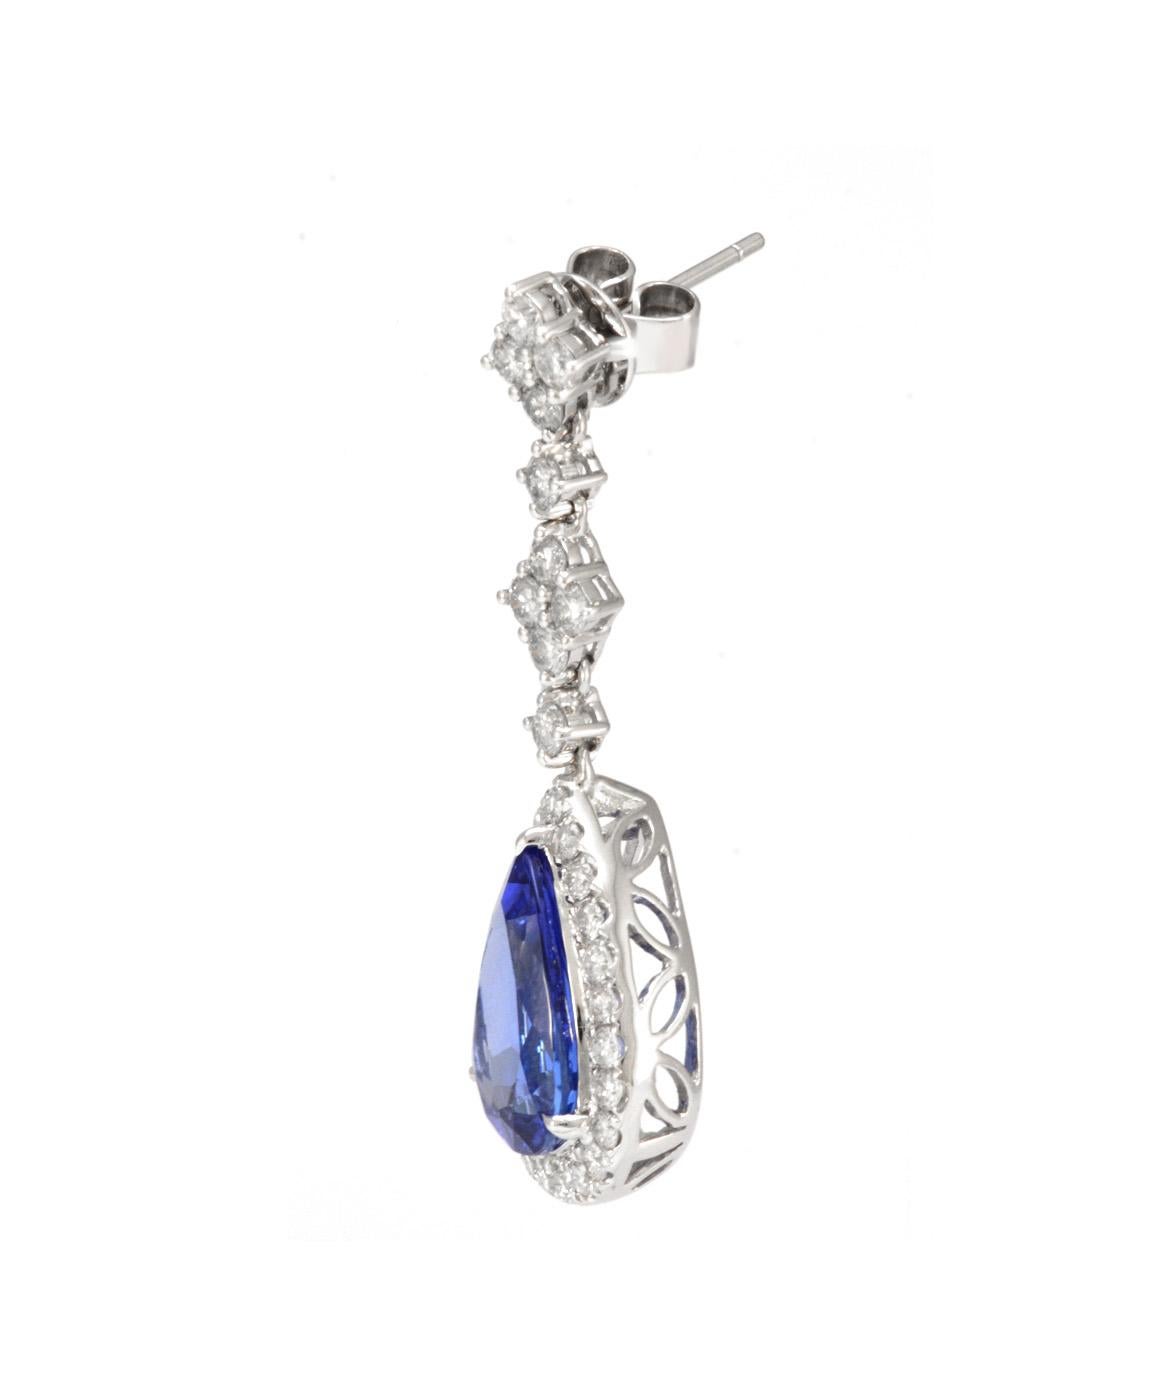 EXCELLENT CONDITION! These GORGEOUS Block D pear shaped Tanzanite drop earrings are truly spectacular. The tanzanite in each earring measures approximately 13.50mm X 8.98mm at its widest point. Each tanzanite is set in a pear shaped halo surrounded